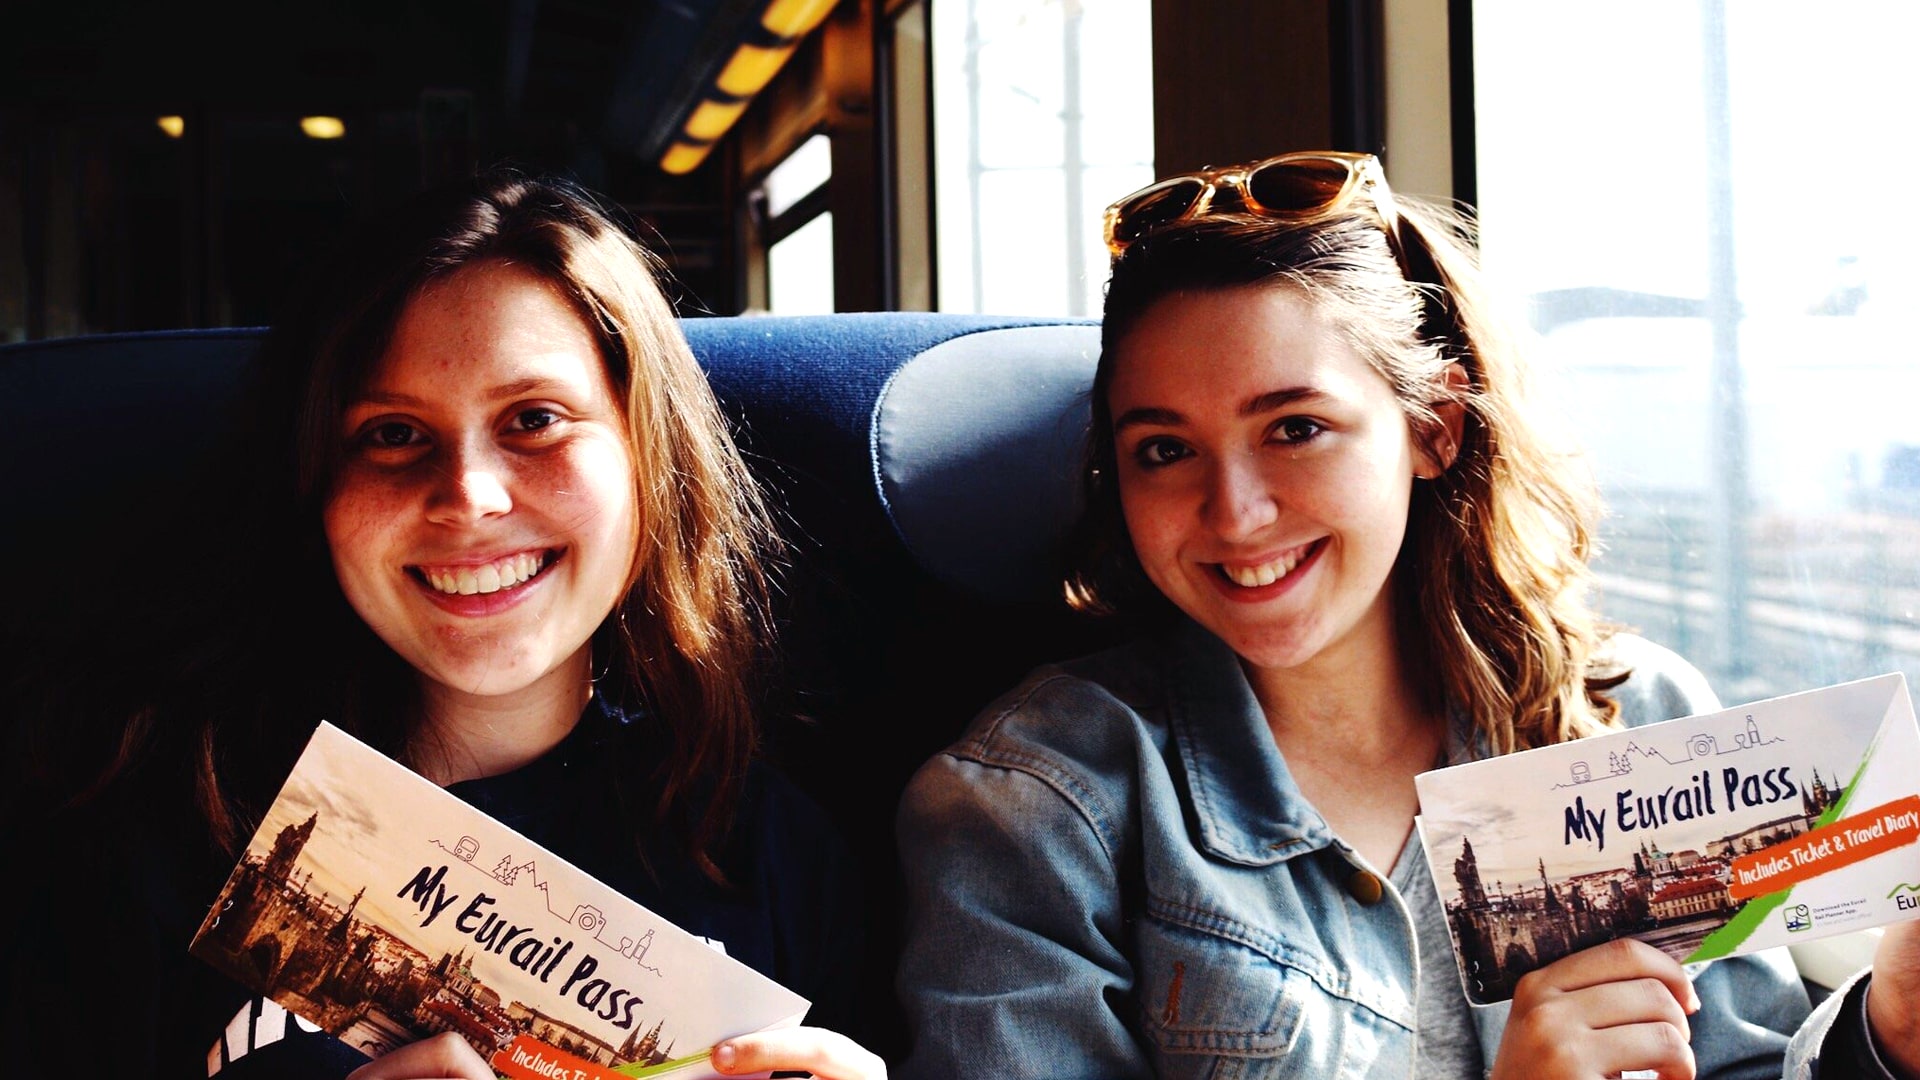 JWU Providence student Katelyn Colantonio (right) on her whirlwind Eurail adventure